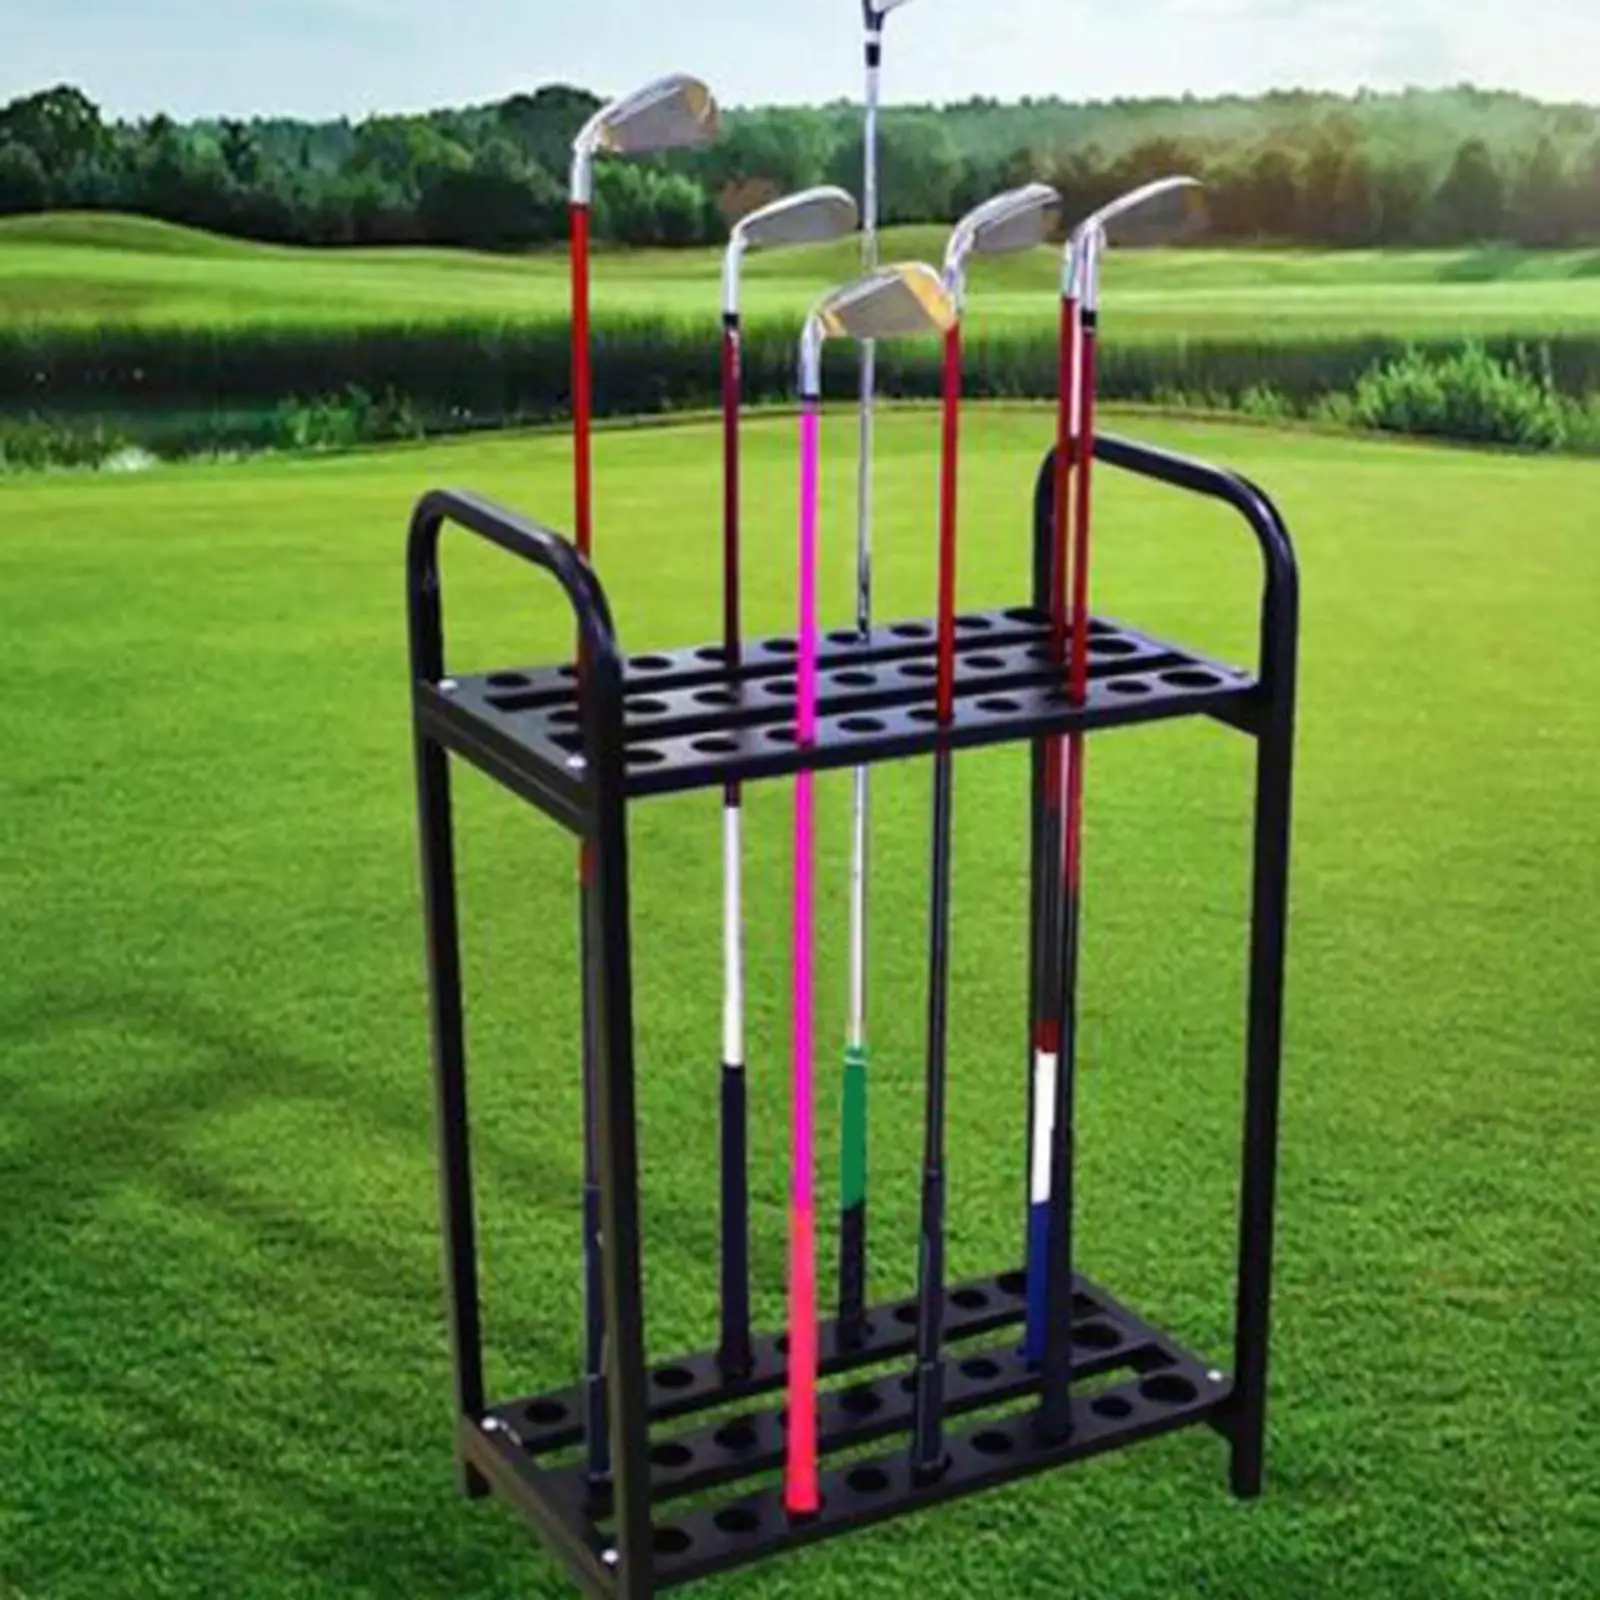 Golf Club Holder 27 Holes Floor Stand Golf Club Rack for Display Pool Table